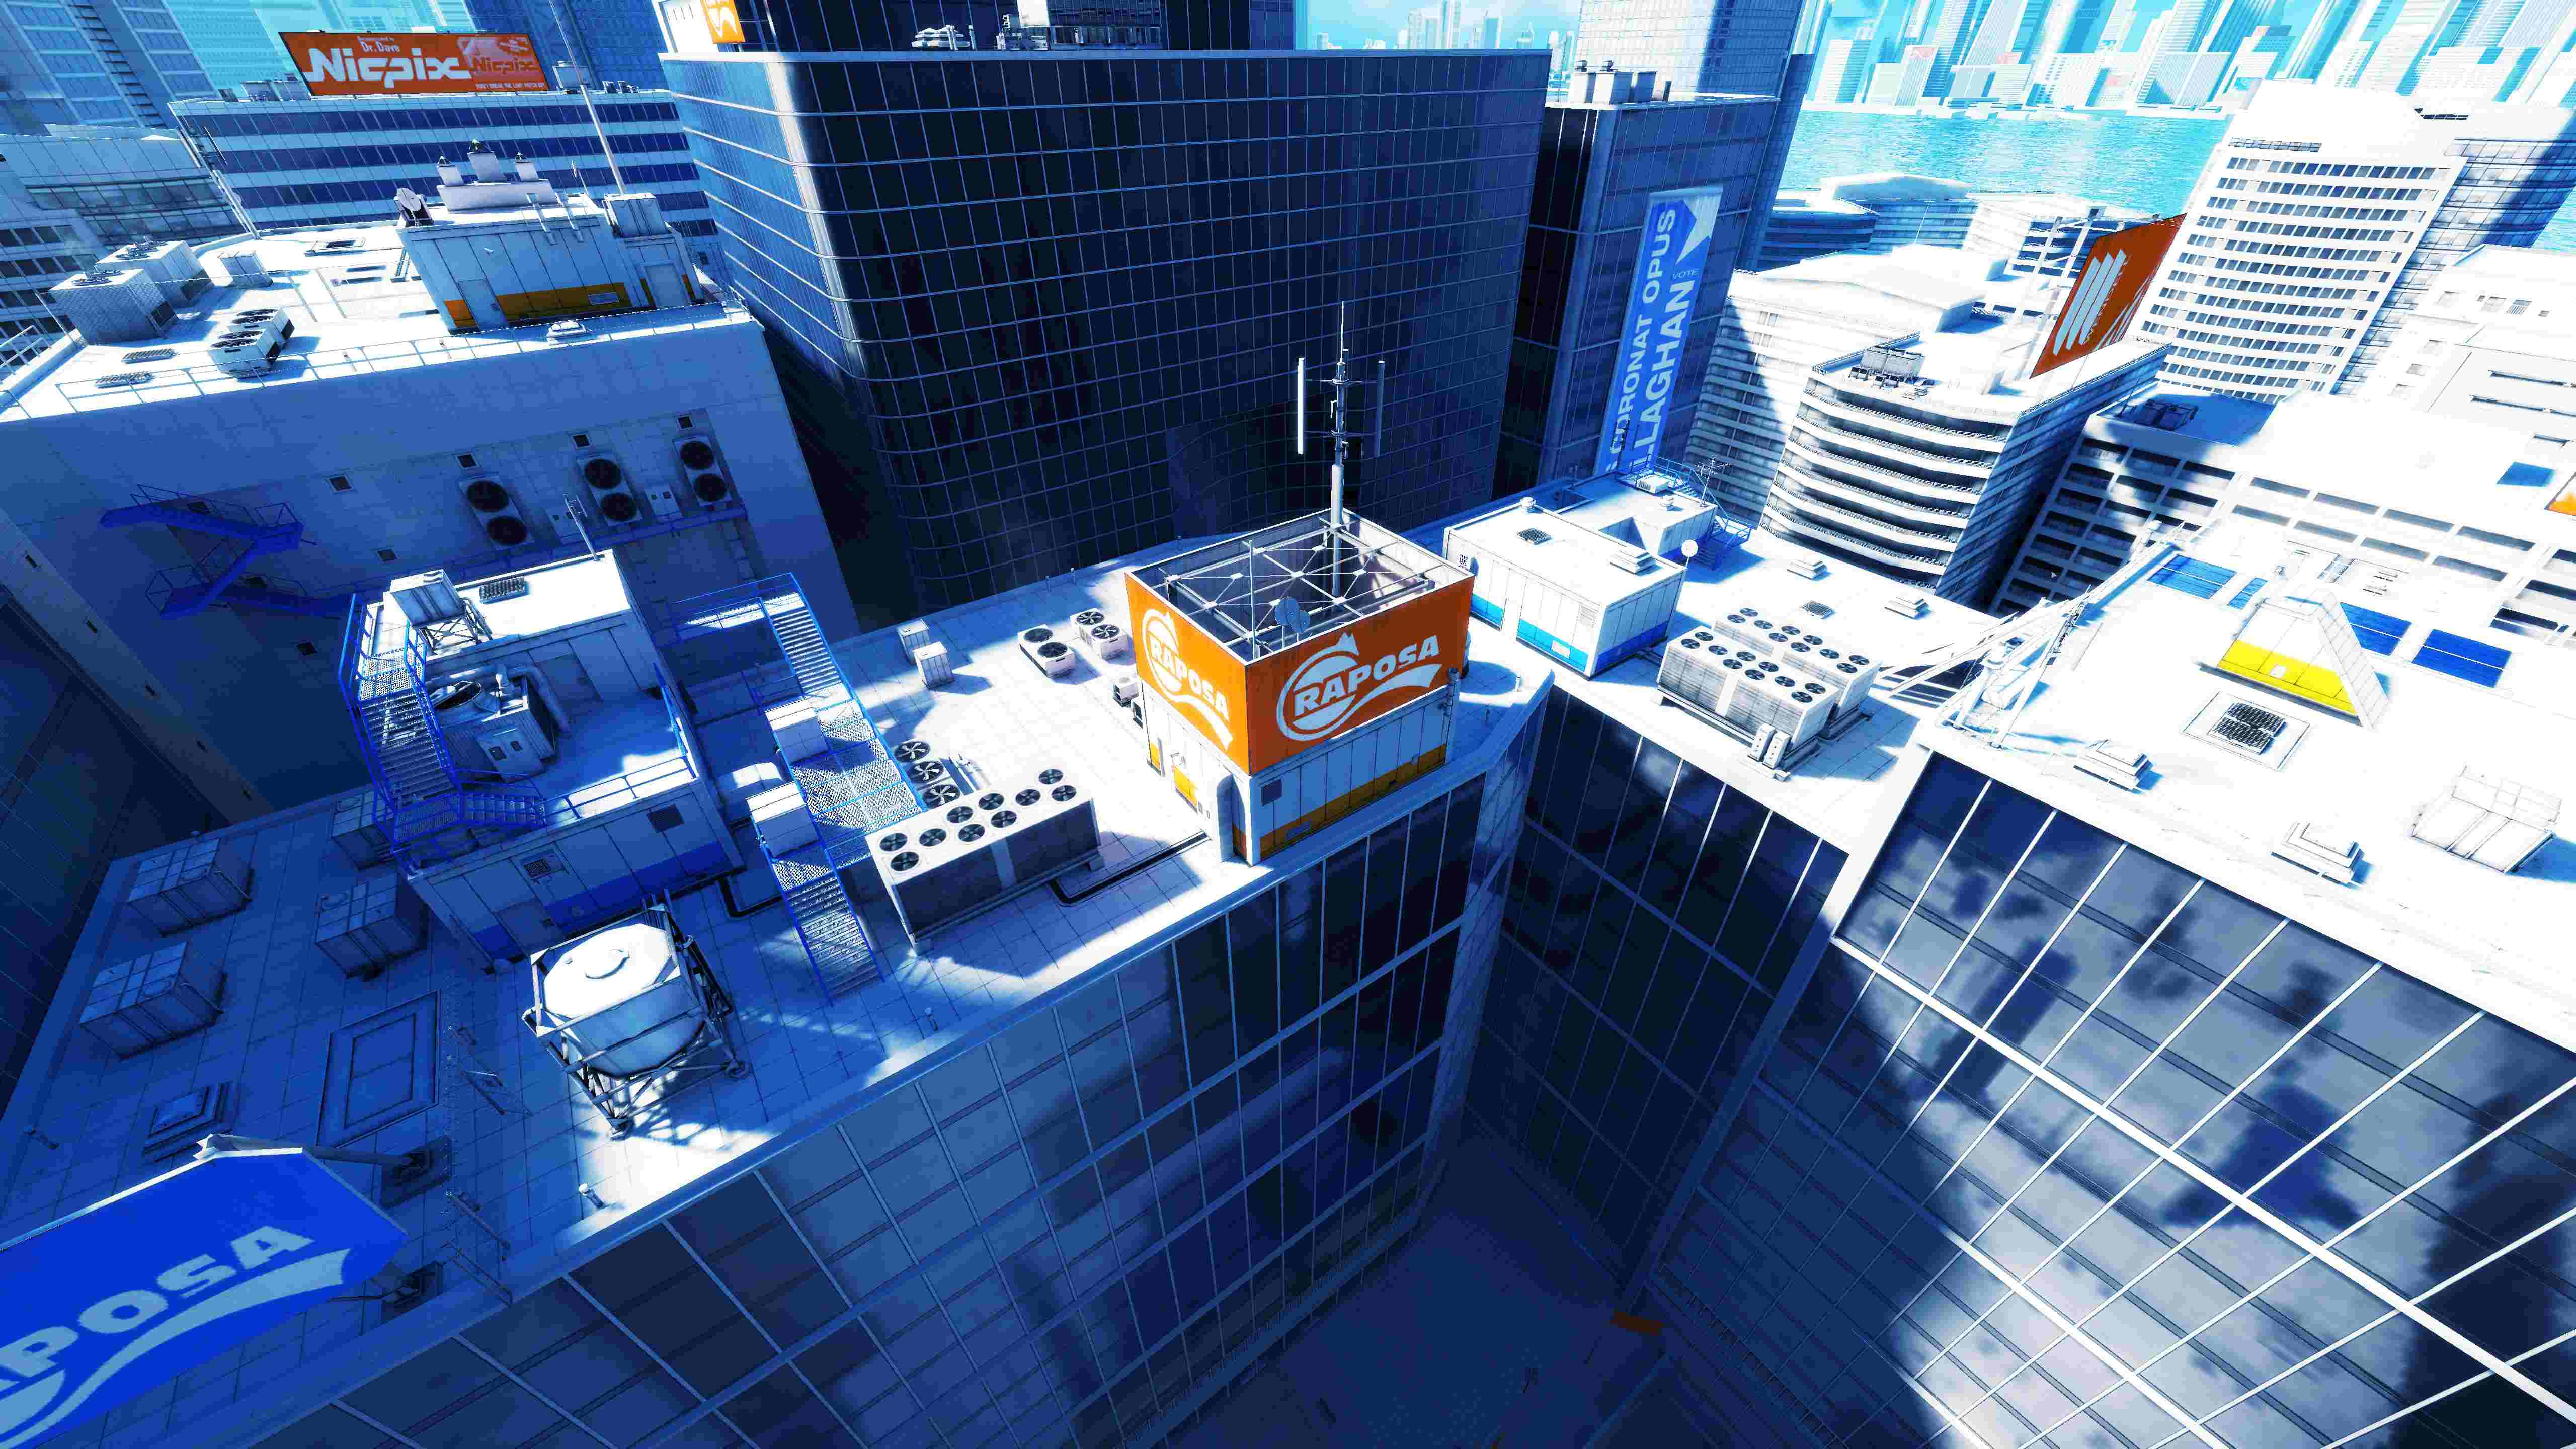 Picture taken overlooking the city of Mirror's Edge.